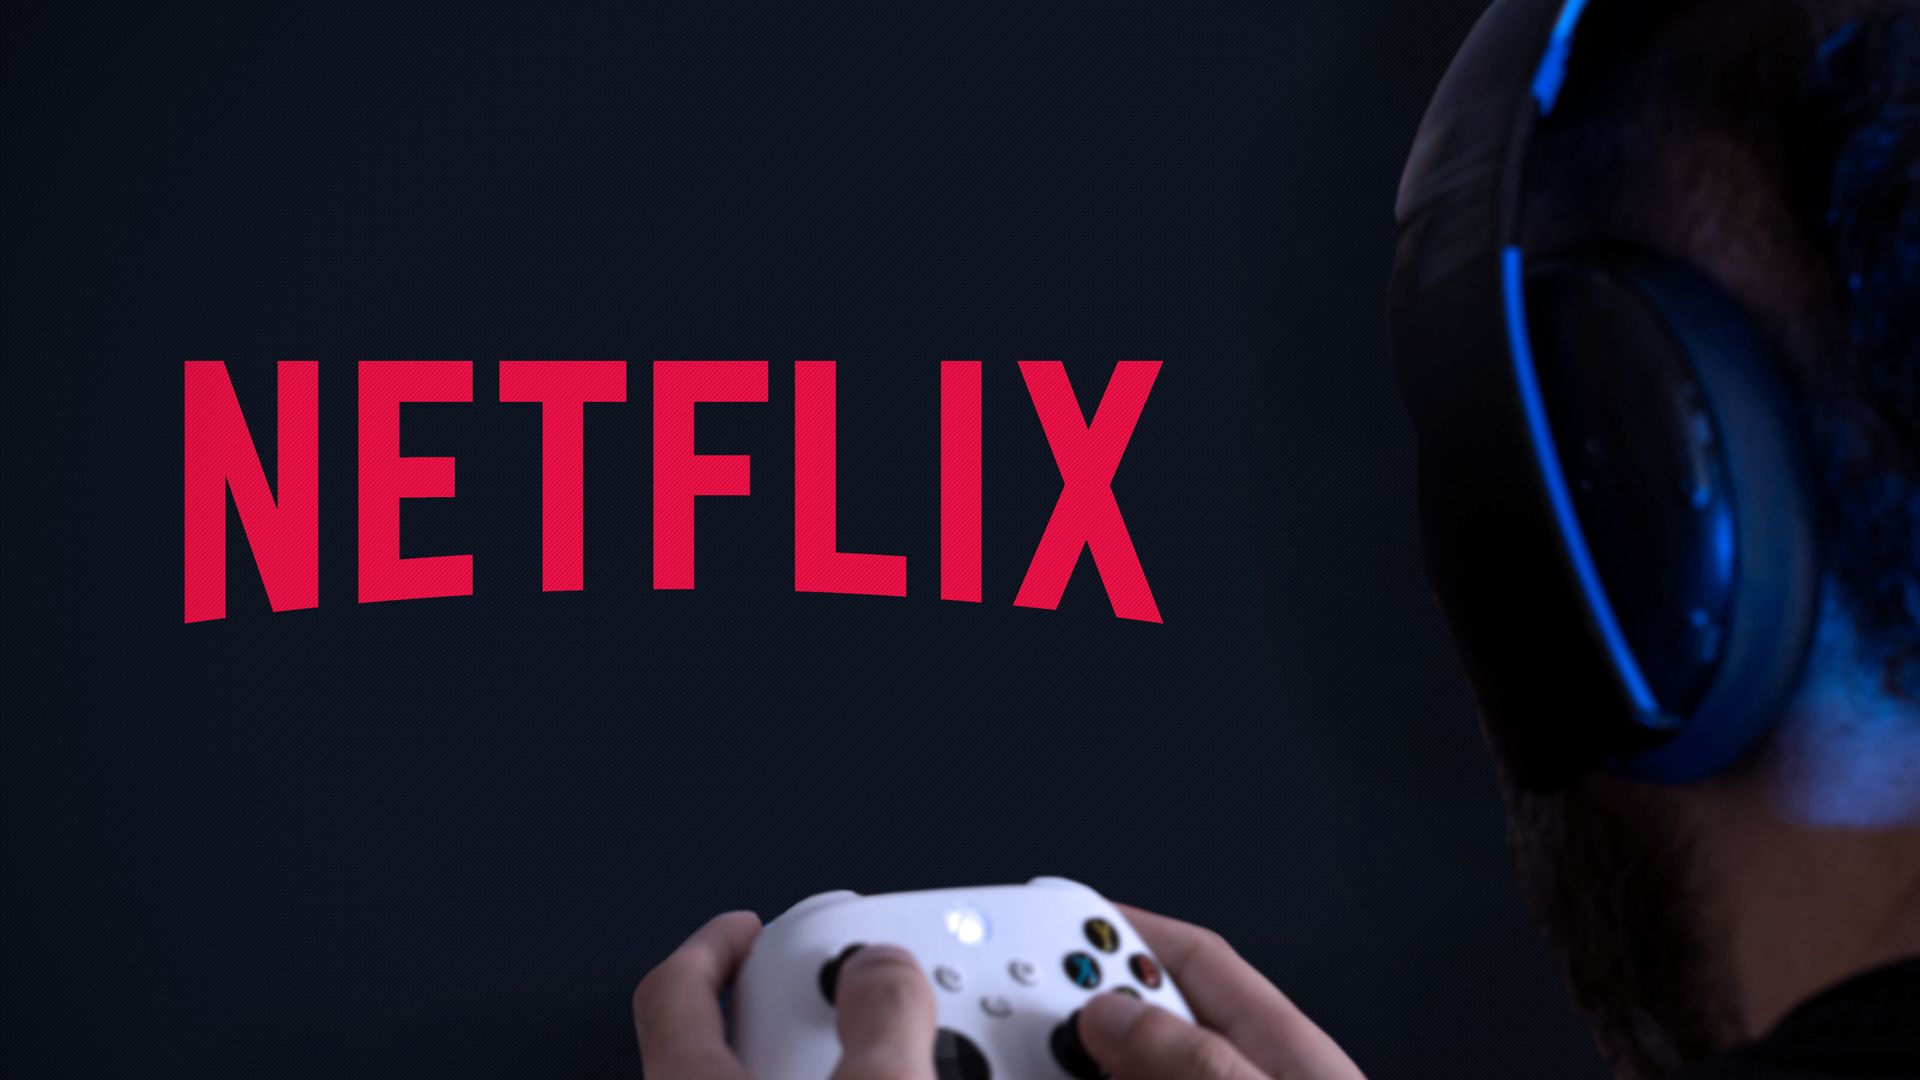 Netflix Games could be coming to your TV, and I can’t believe I'm